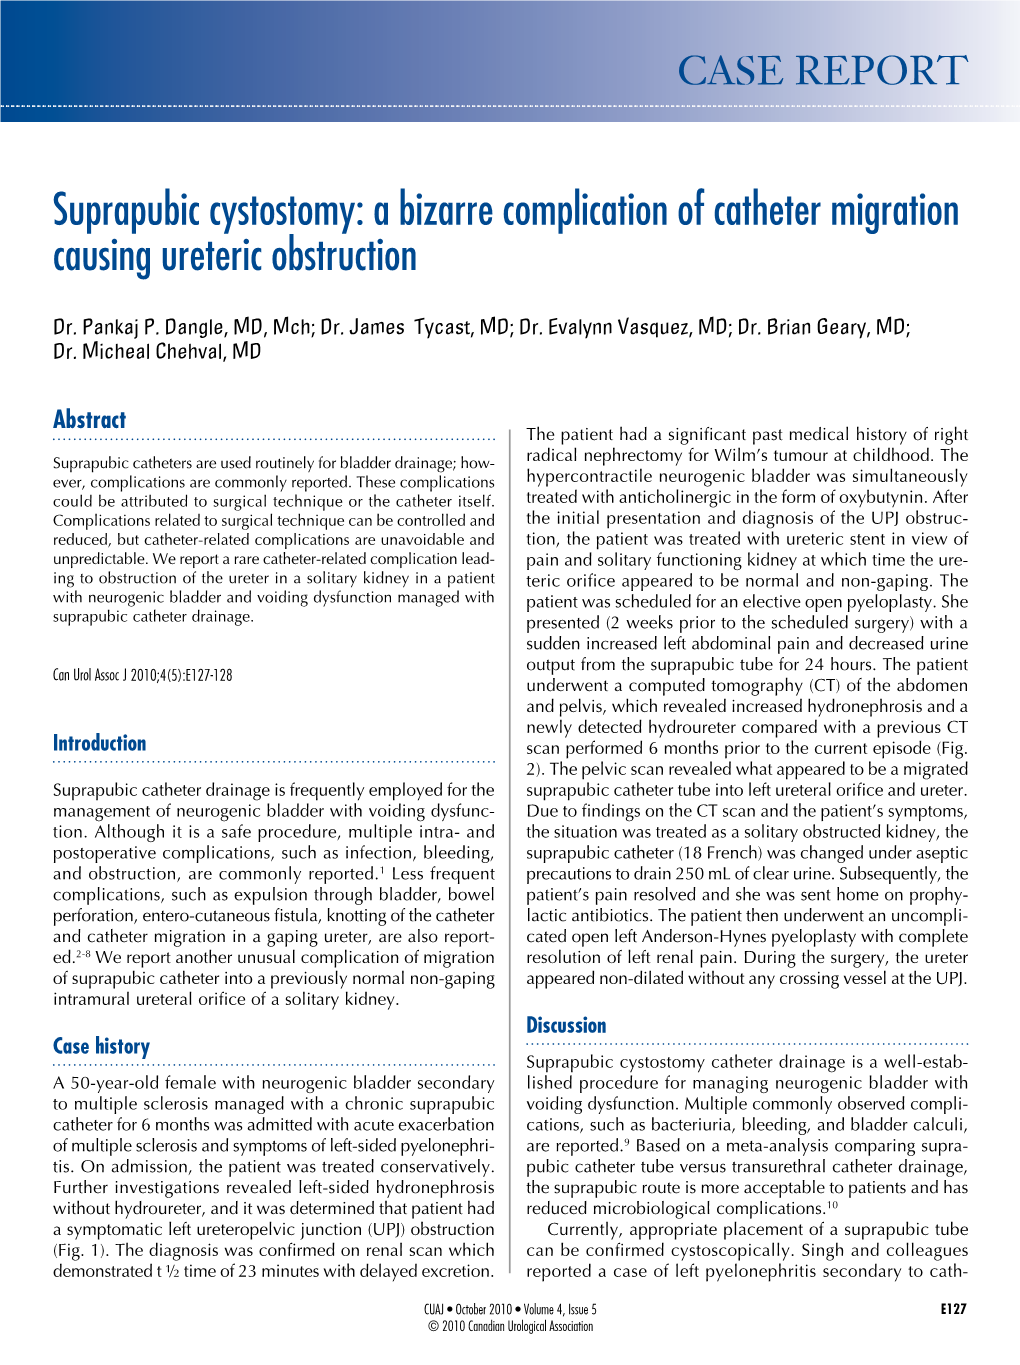 Suprapubic Cystostomy: a Bizarre Complication of Catheter Migration Causing Ureteric Obstruction